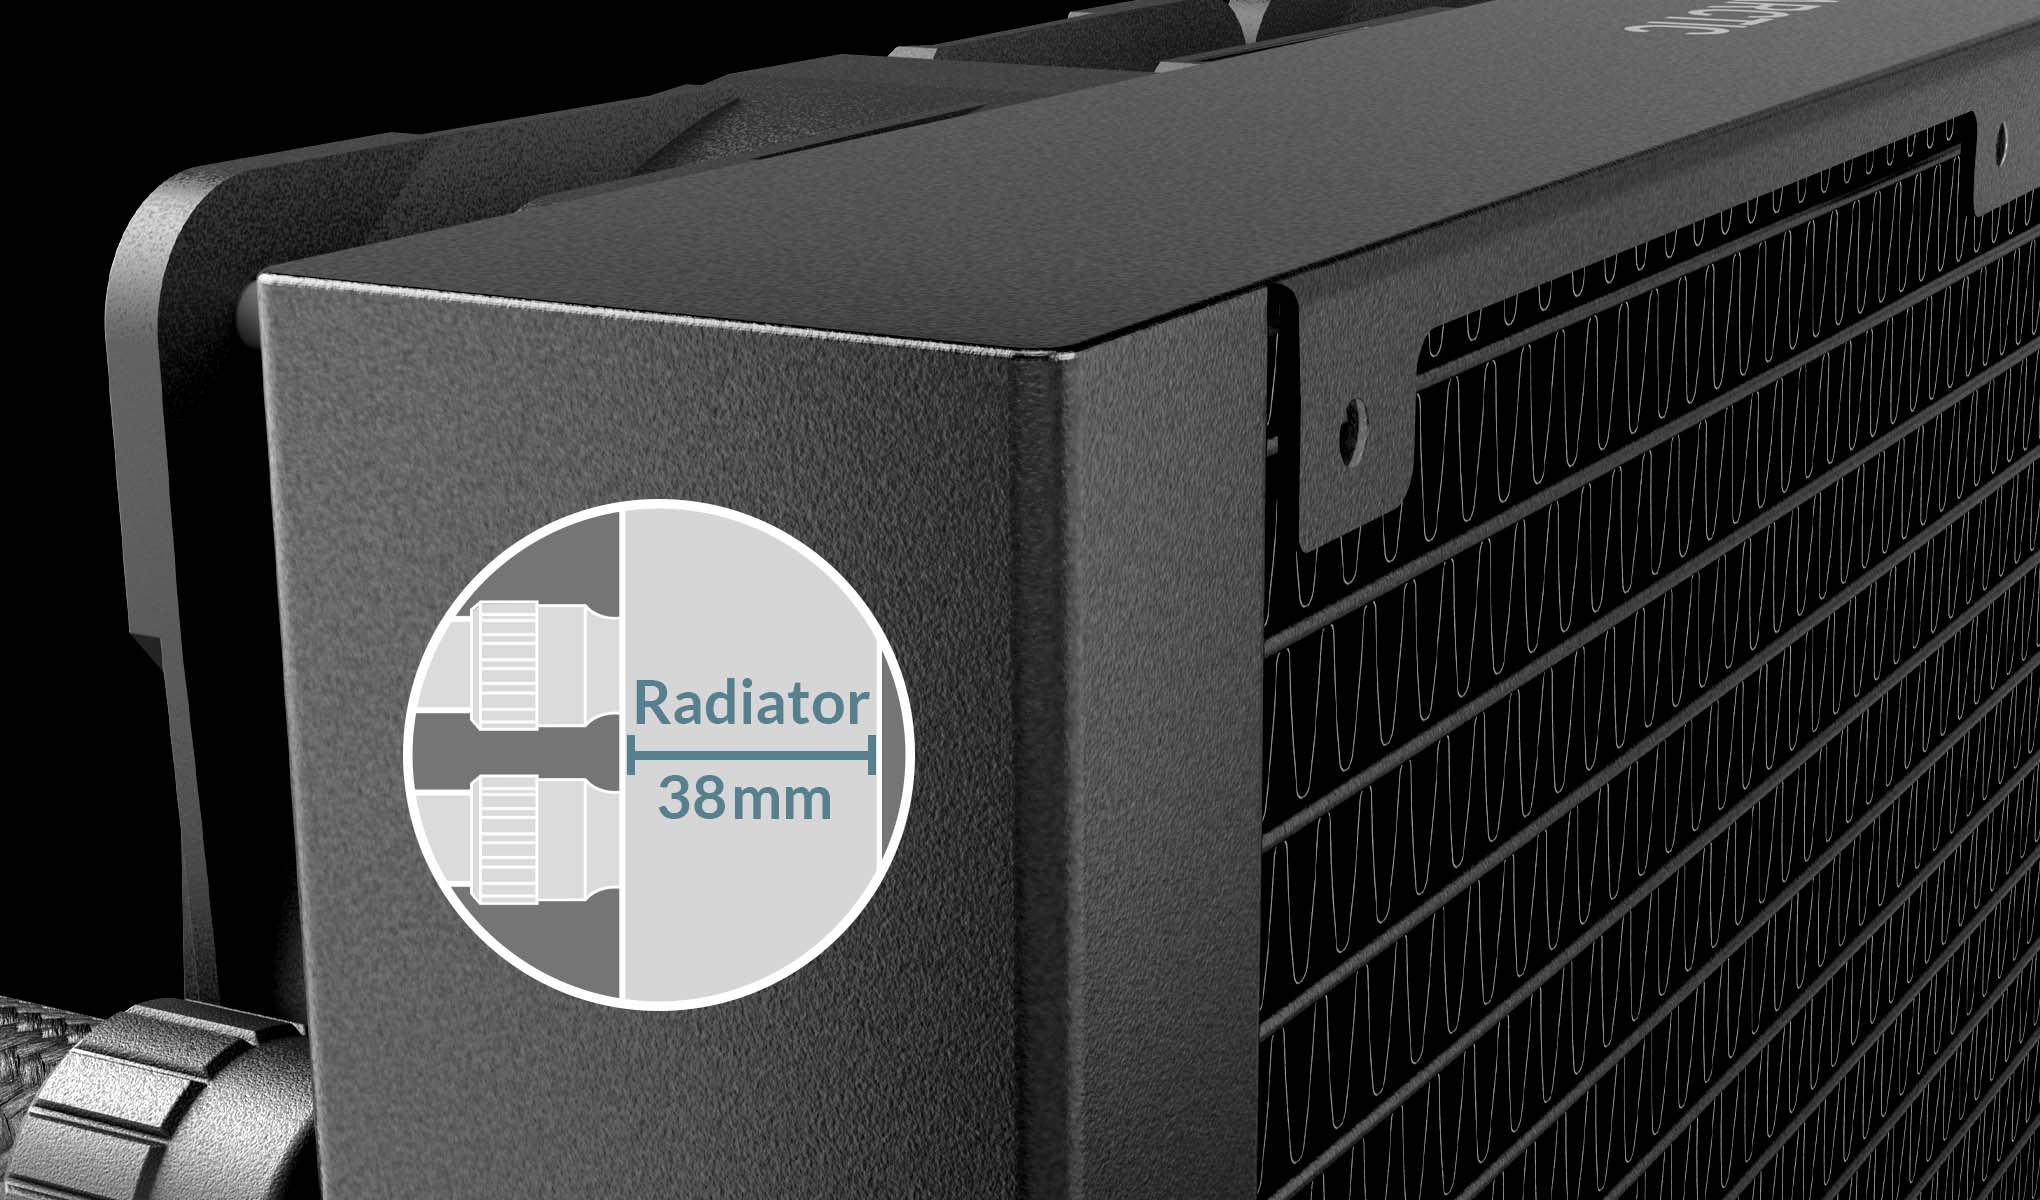 ACFRE00142A Improved Radiator Design